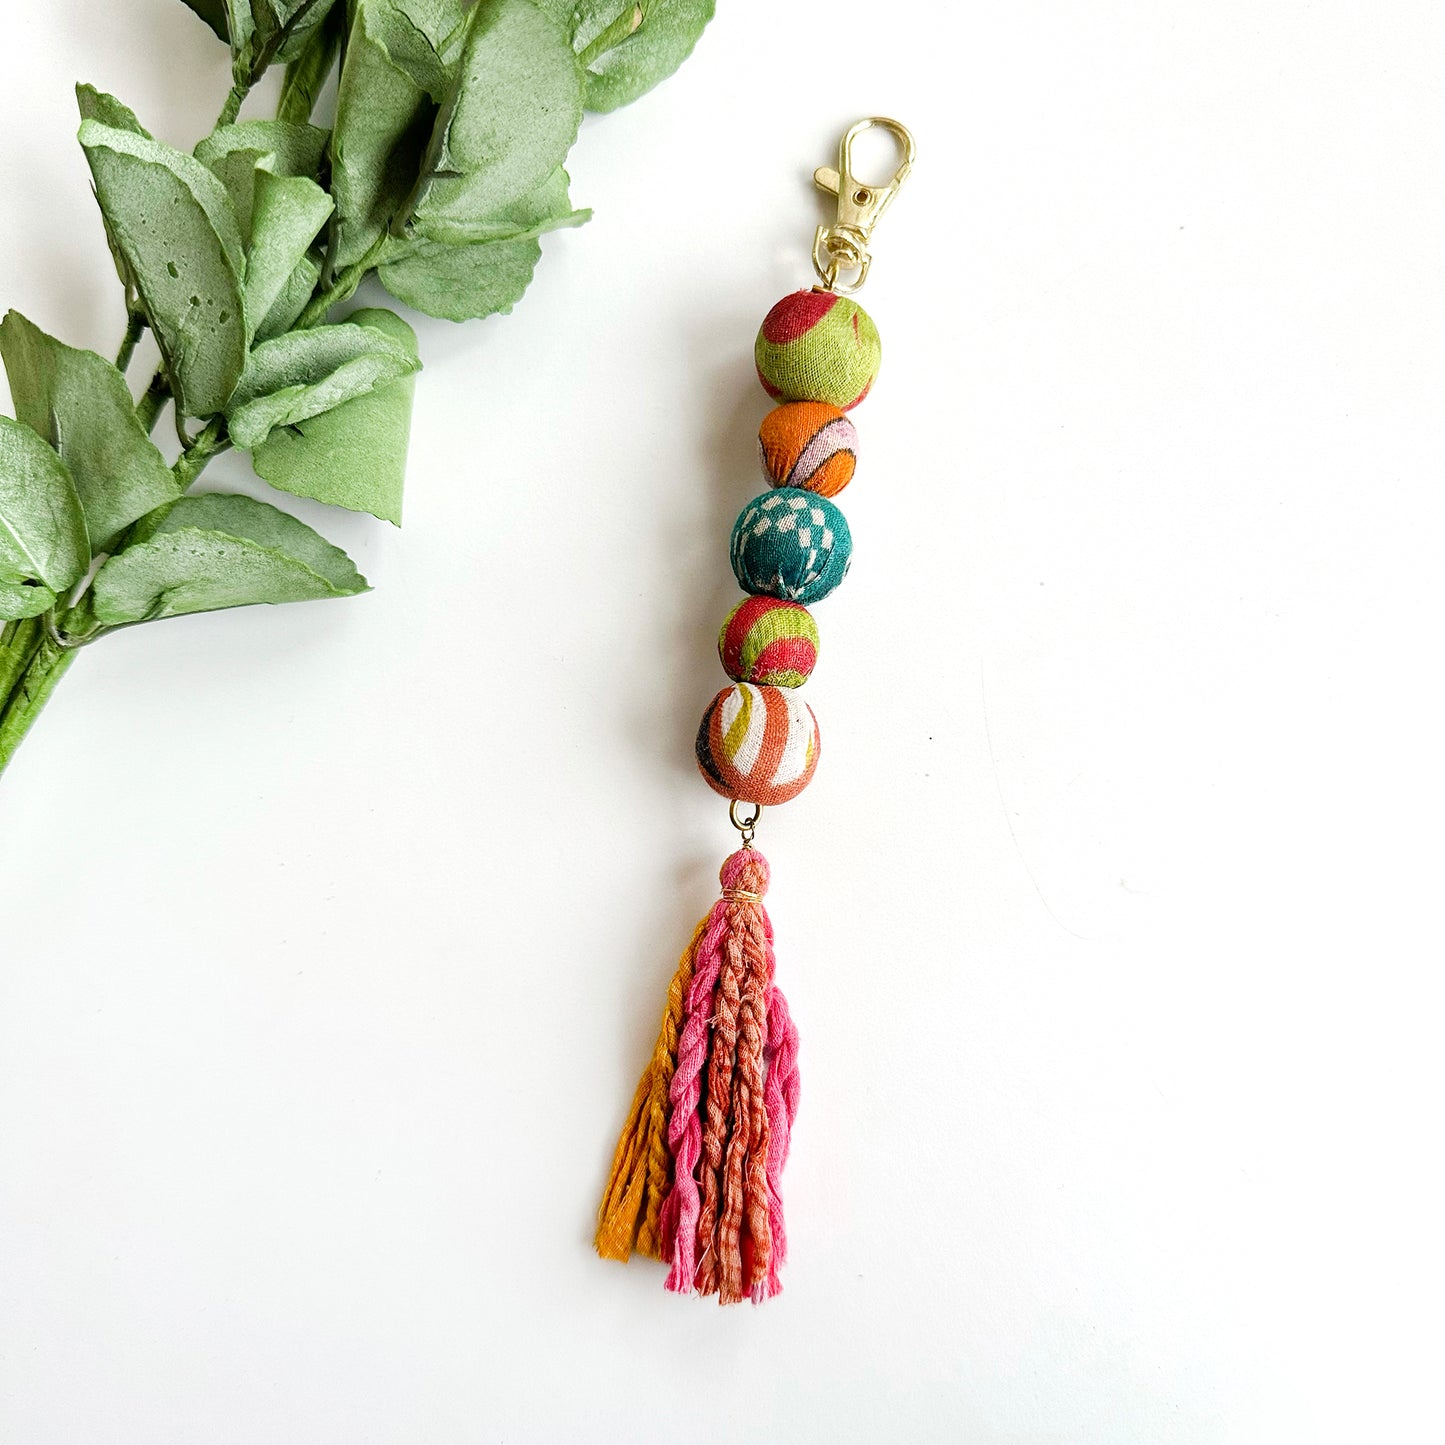 A keychain features five colorful textile-wrapped beads and is finished off with a colorful tassel.